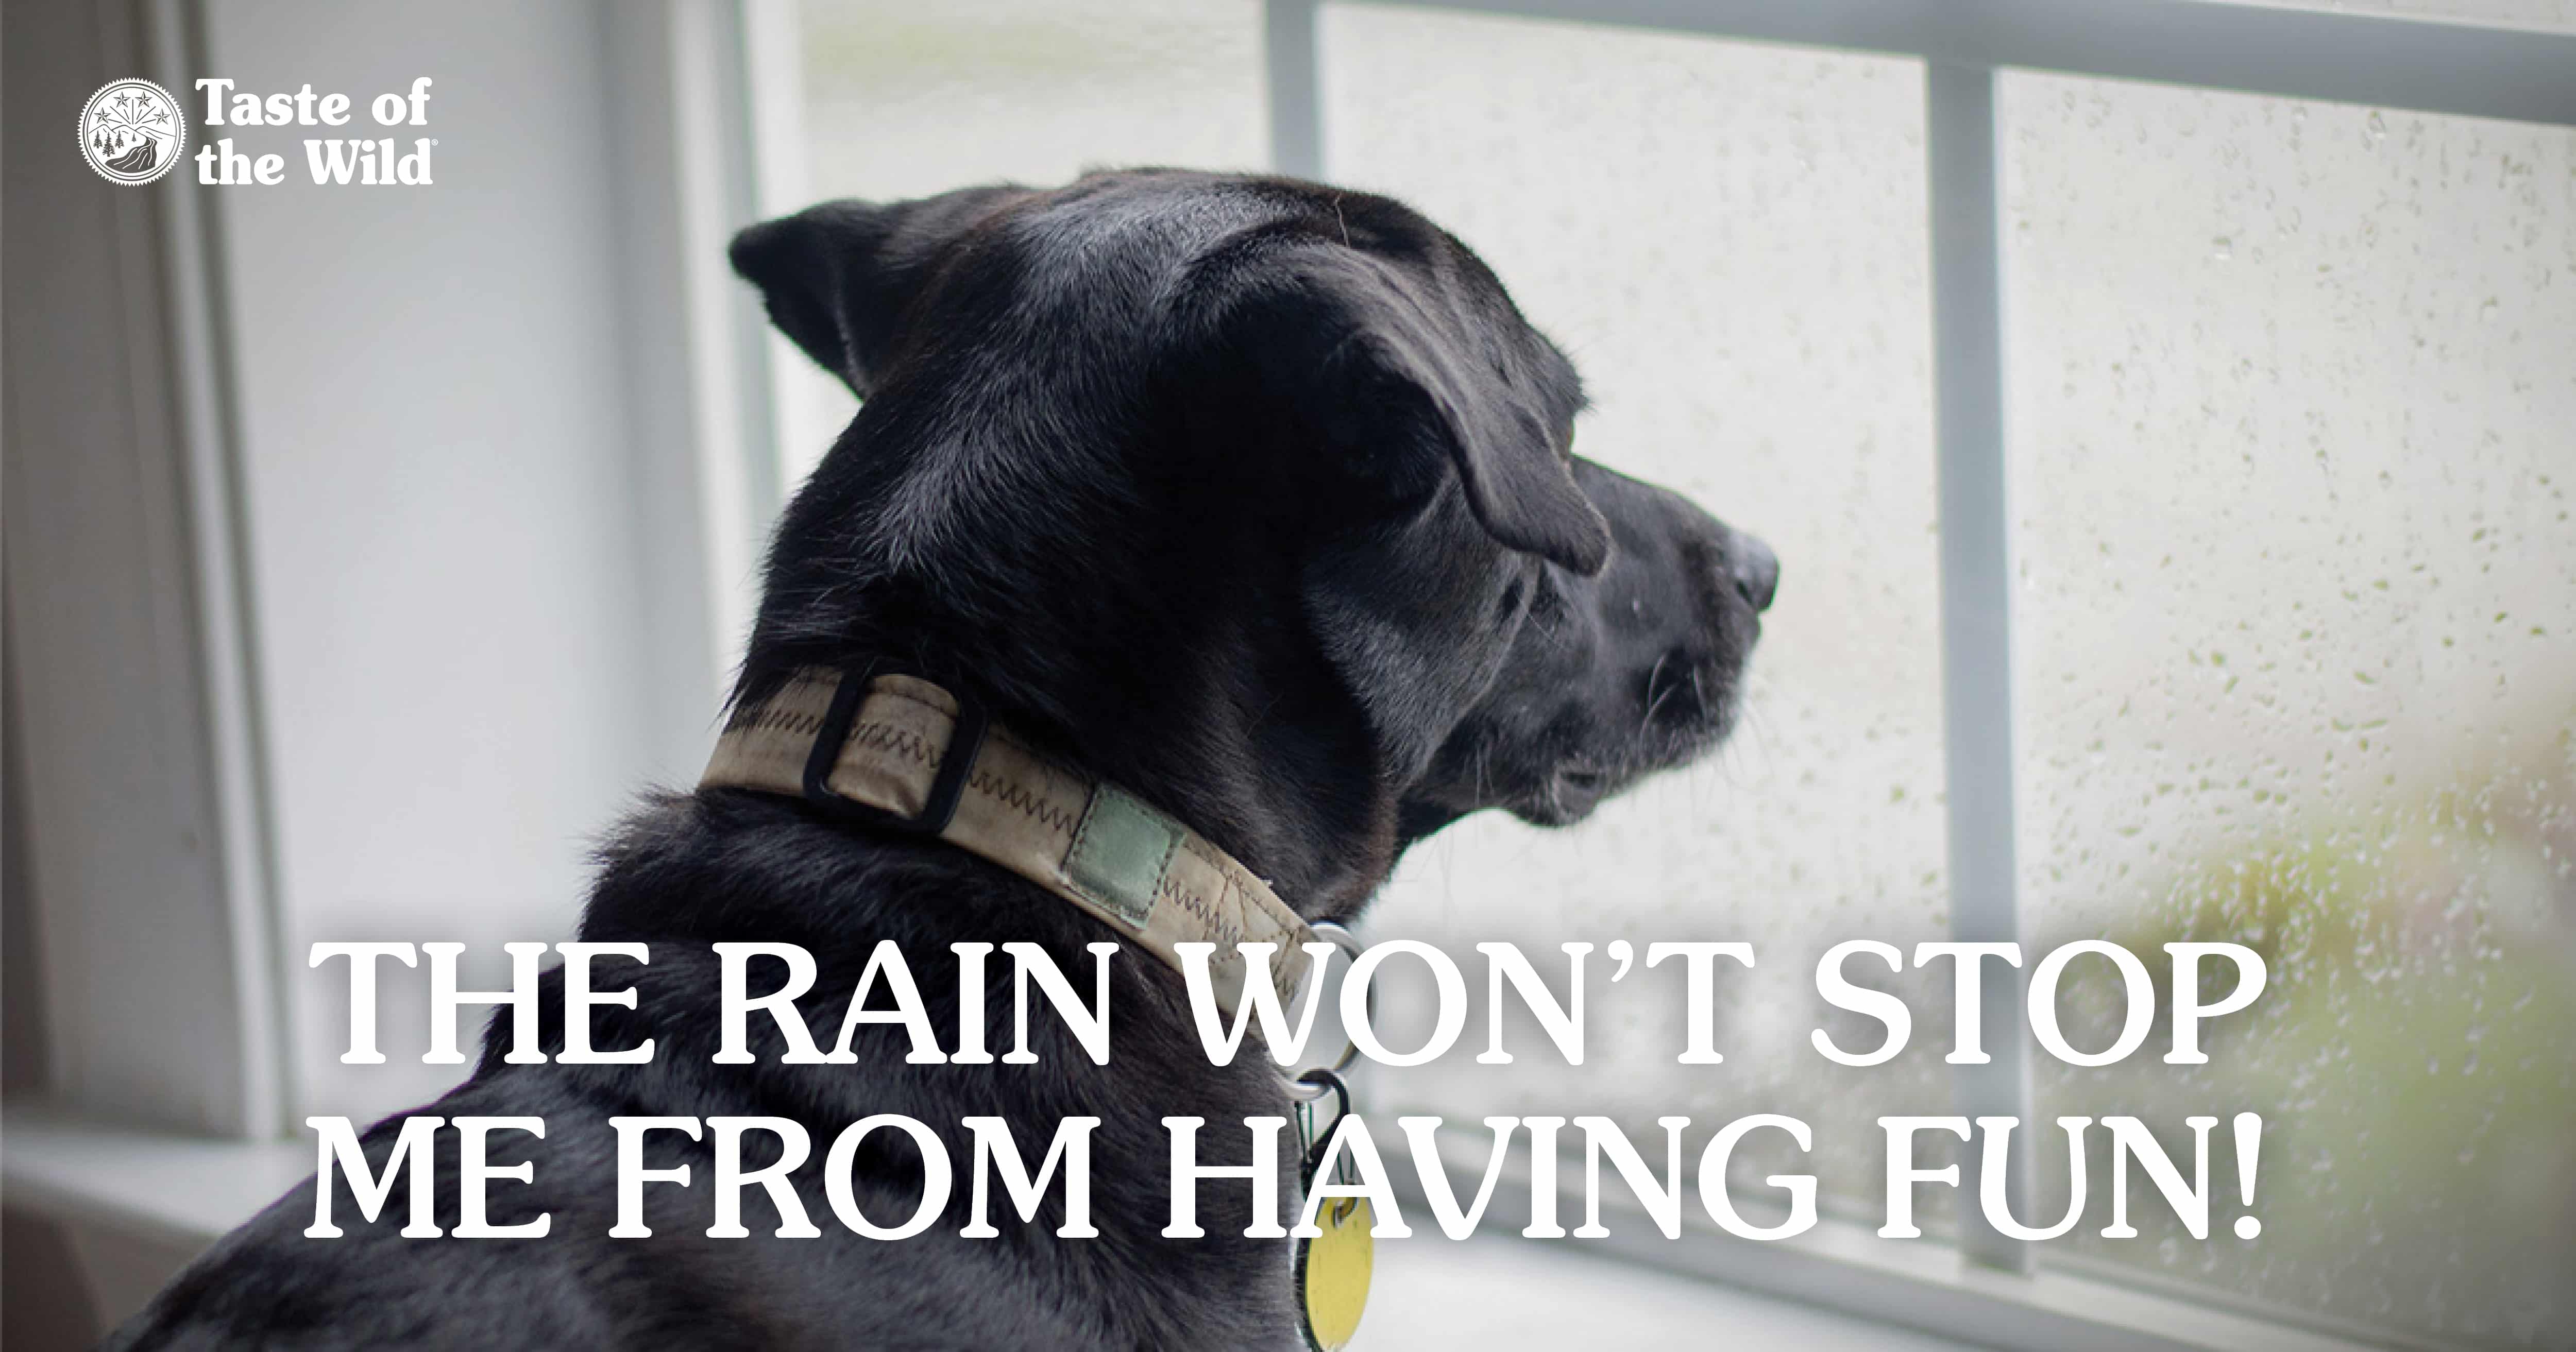 A black dog looking out a window while it’s raining outside.